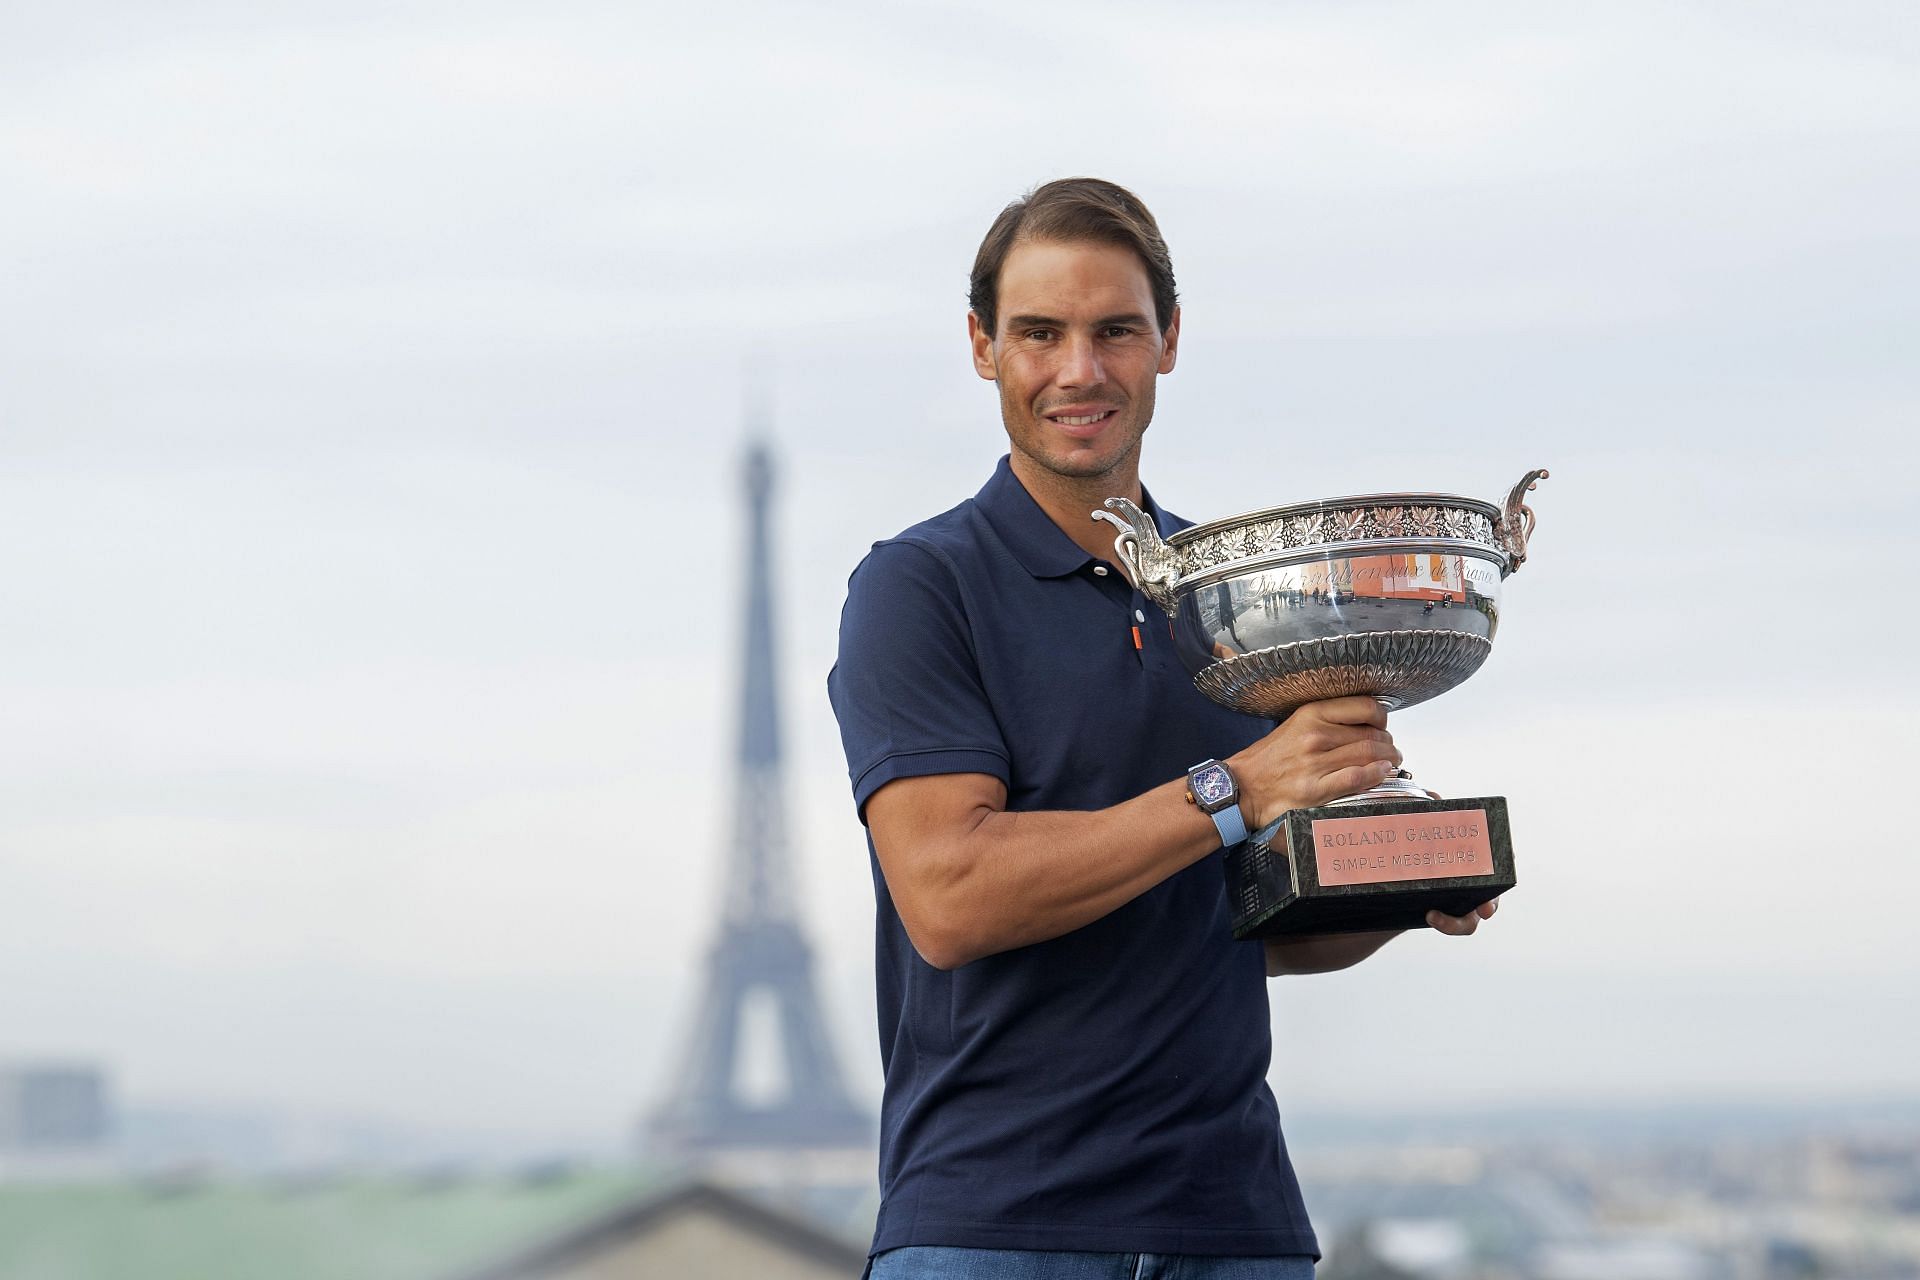 Rafael Nadal with Les Mousquetaires trophy following his 2020 Roland Garros victory